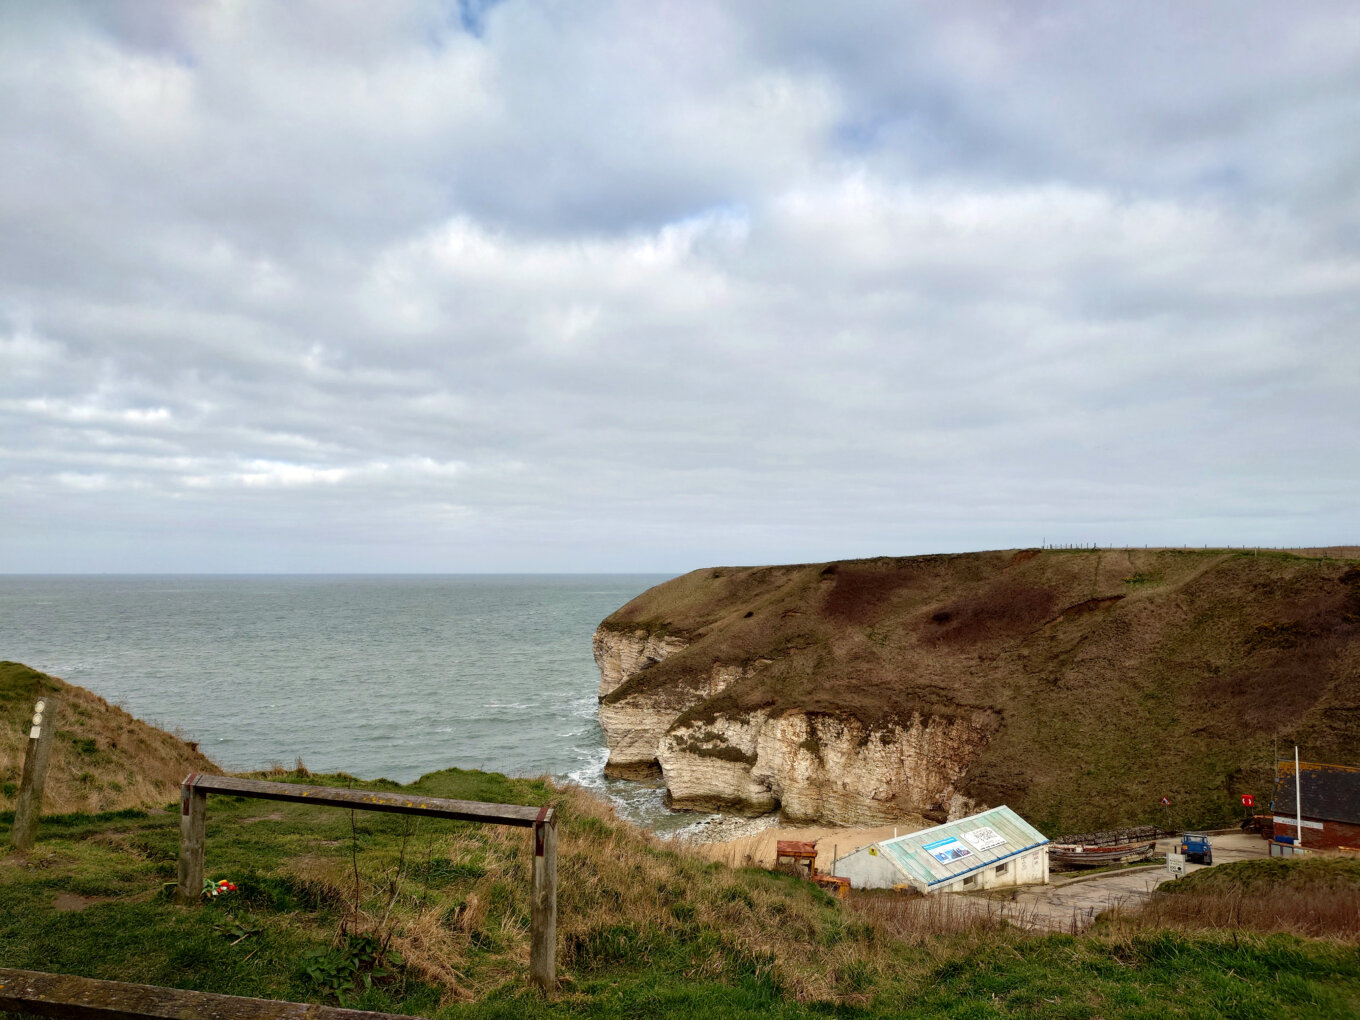 Dramatic cliffs with the sea and a cloudy sky